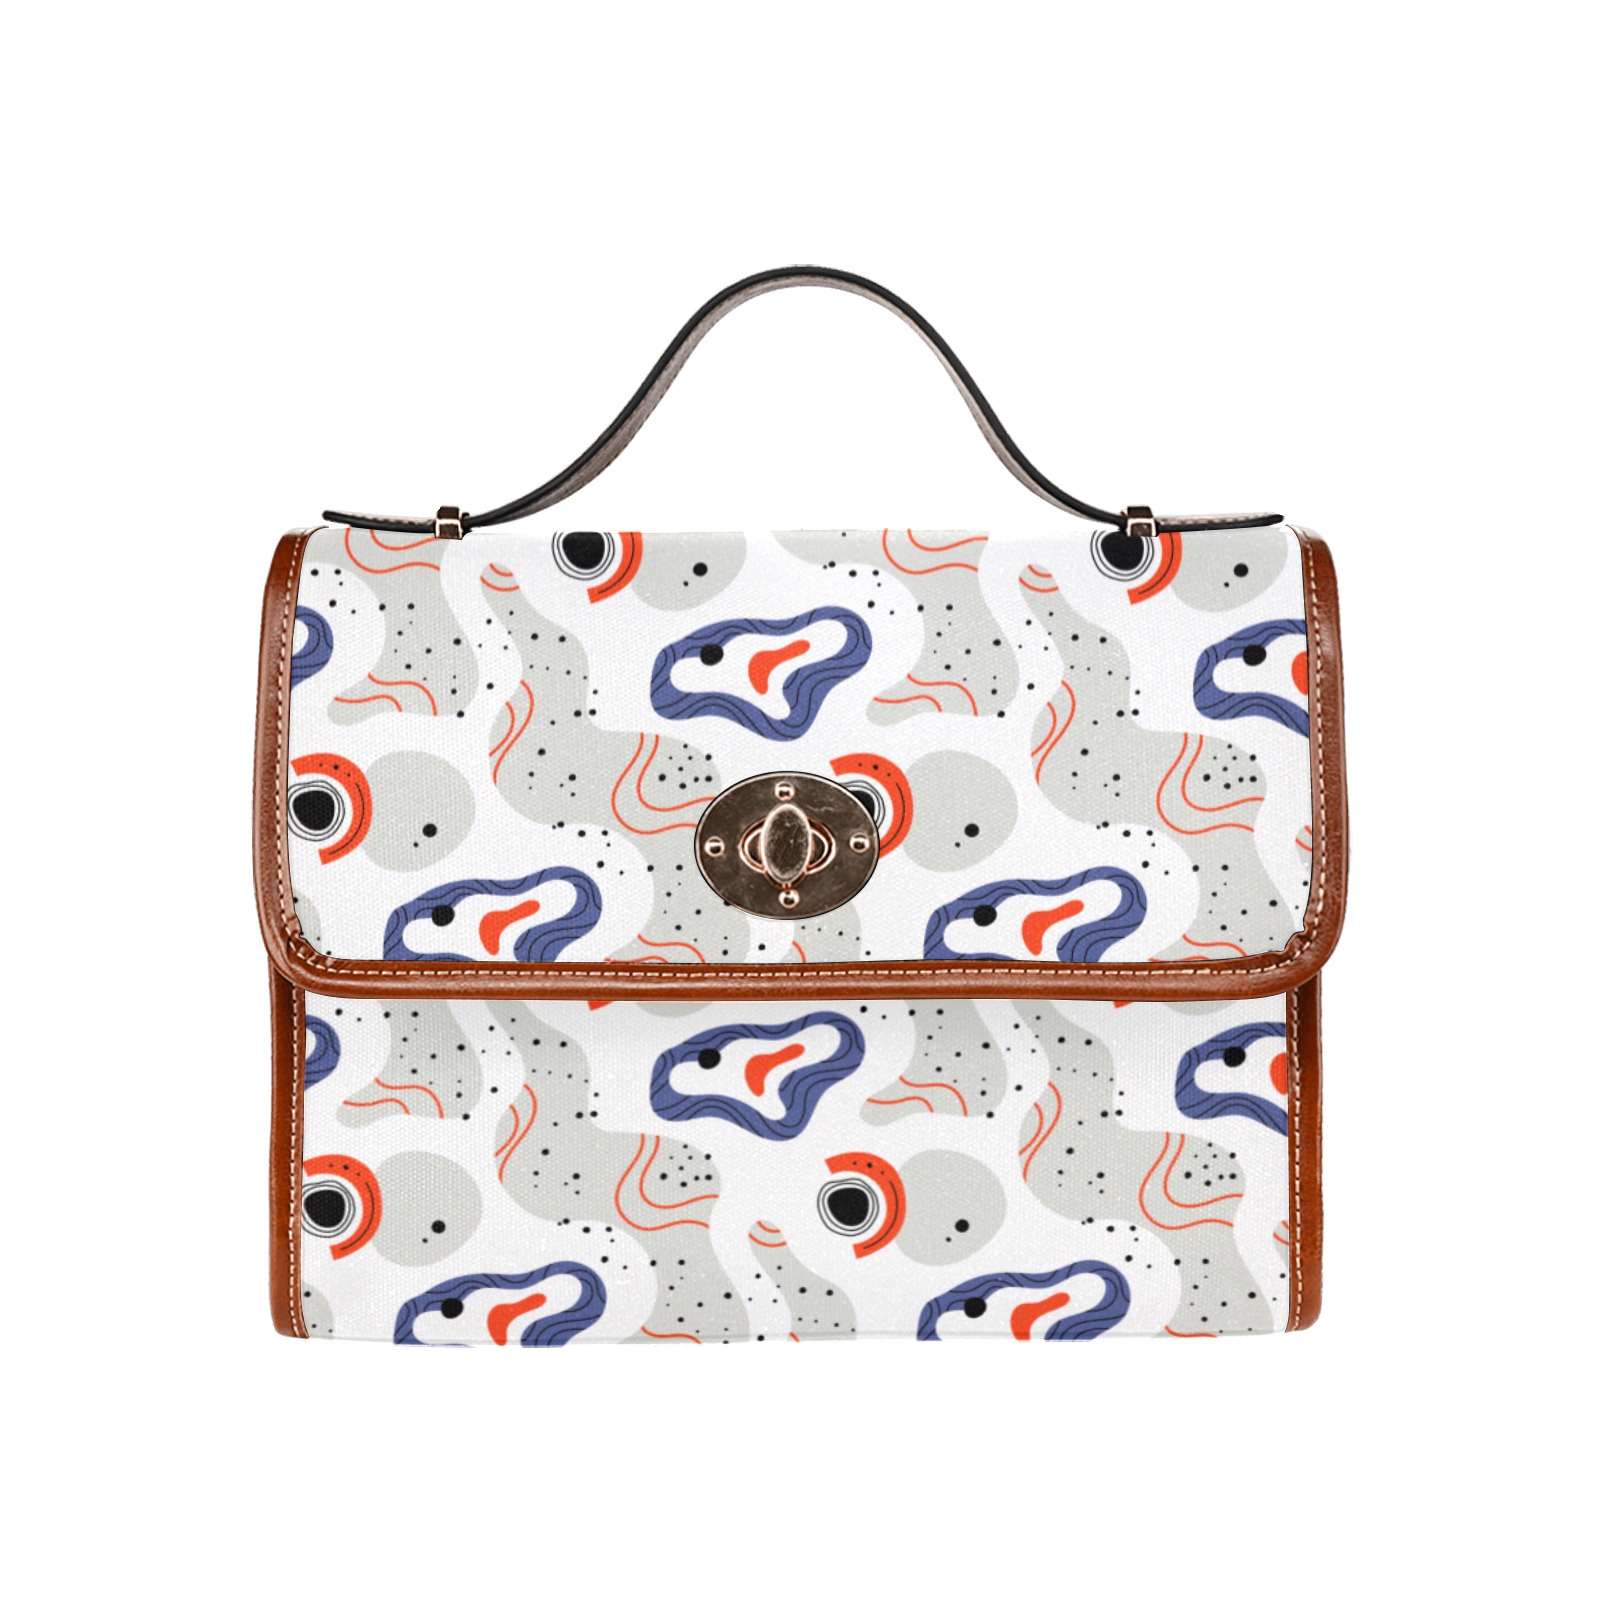 Elegant Abstract Mid Century Pattern Waterproof Canvas Bag-Brown (All Over Print) (Model 1641)